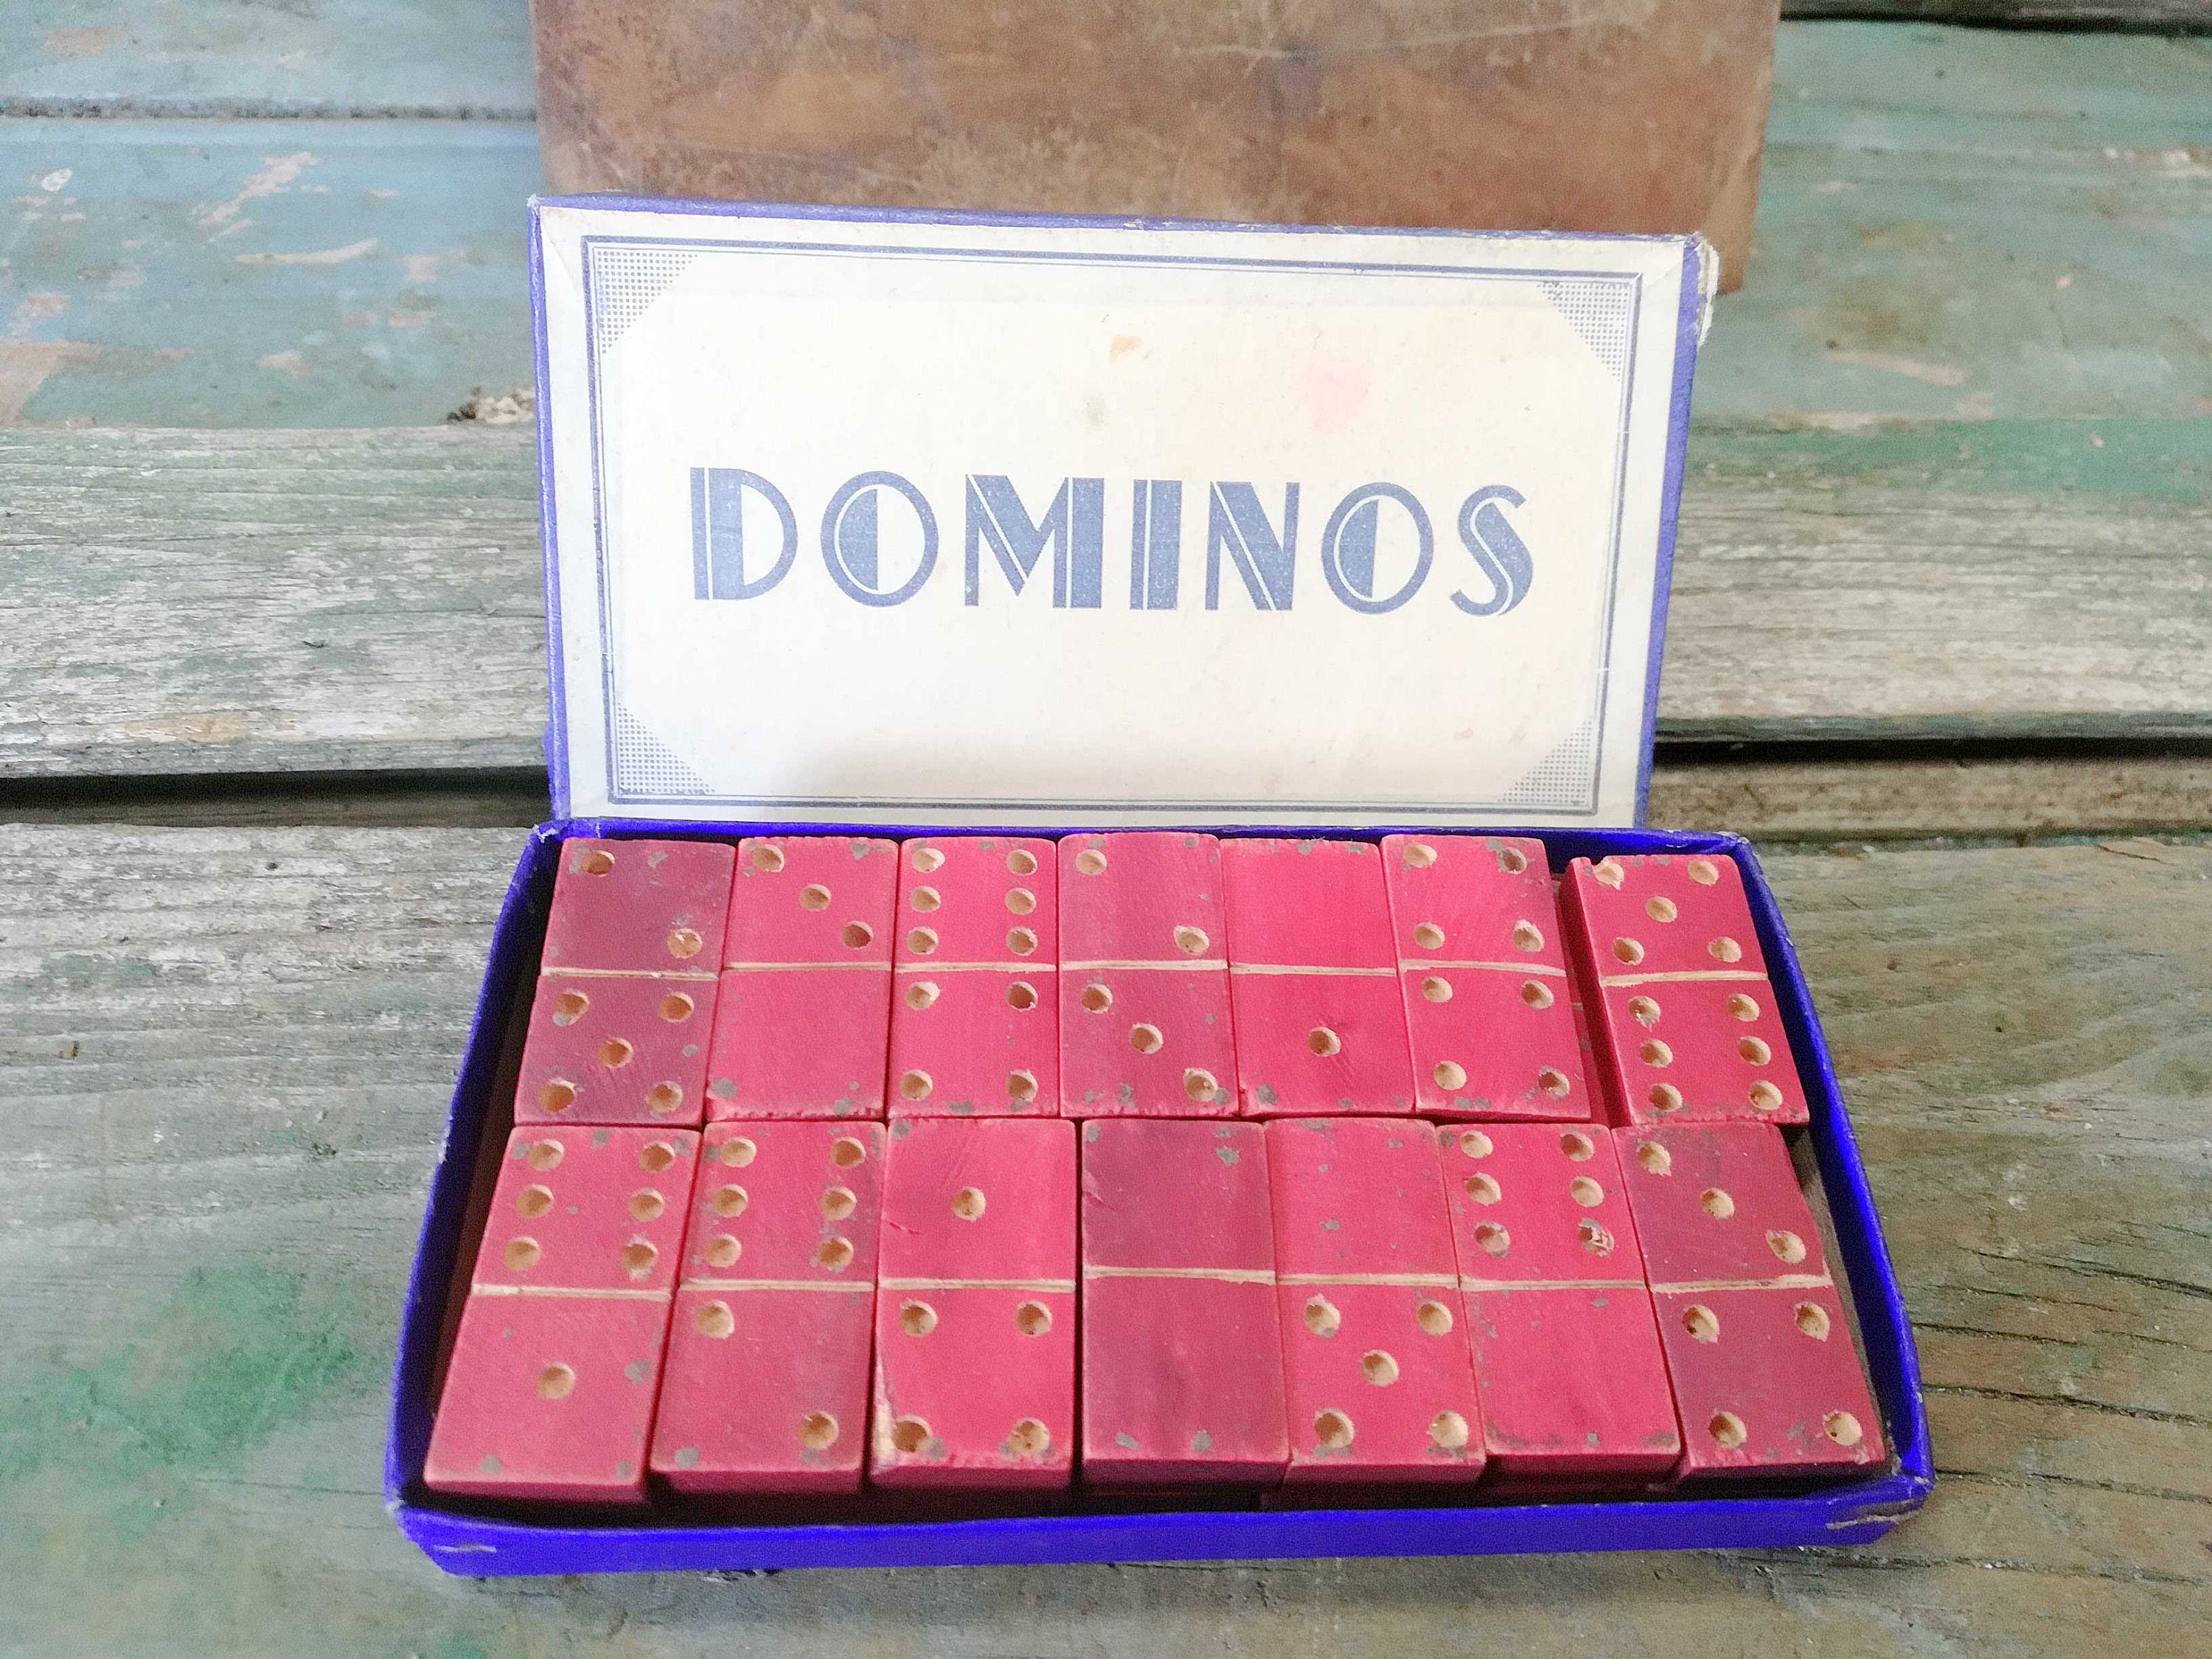 Wooden Domino Game Wooden Dumber Dominoes Eco Friendly Toy 